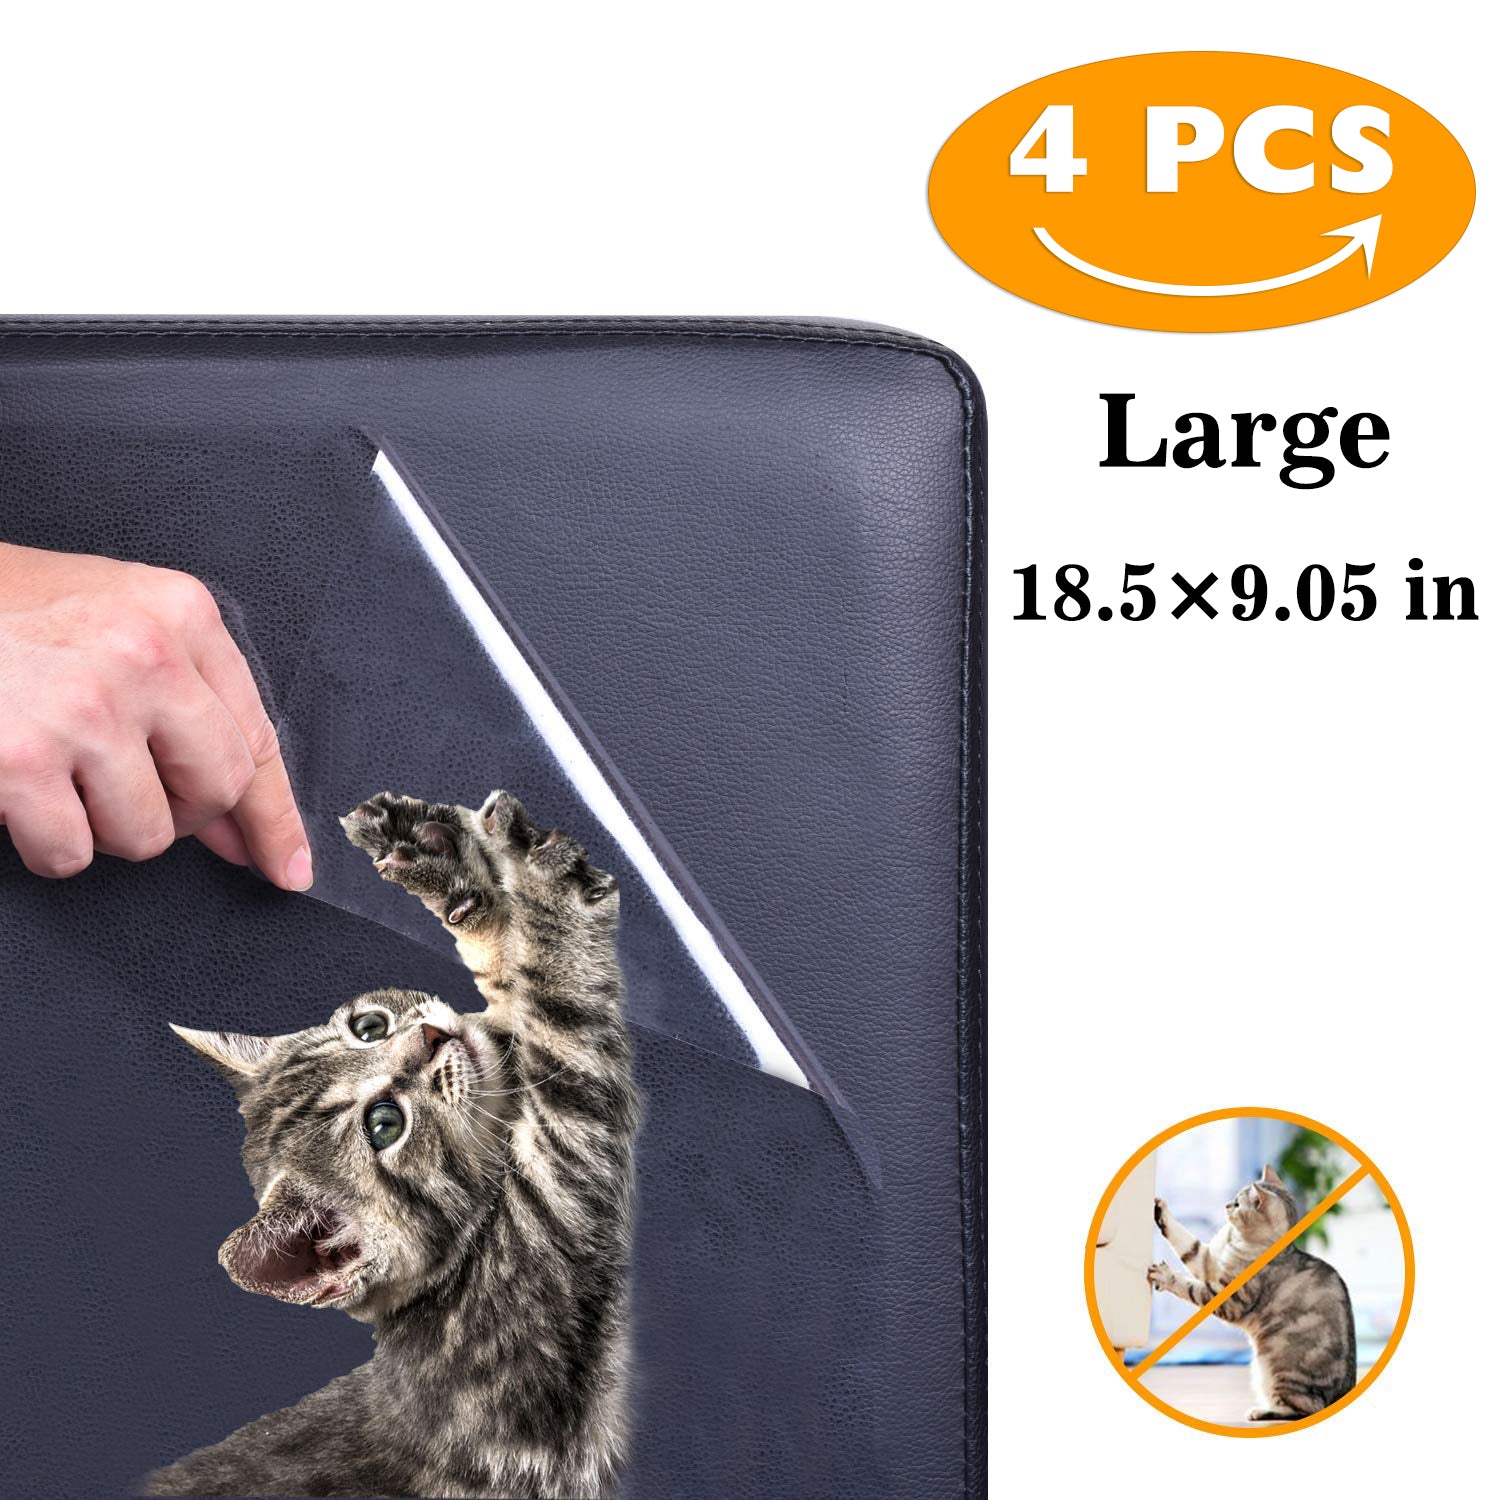 New Upgrade - 4PCS Large (18.5 X9.05Inch) Furniture Defender Cat Scratching Guard, Furniture Protectors from Pets, anti Cat Scratch Deterrent, Claw Proof Pads for Door